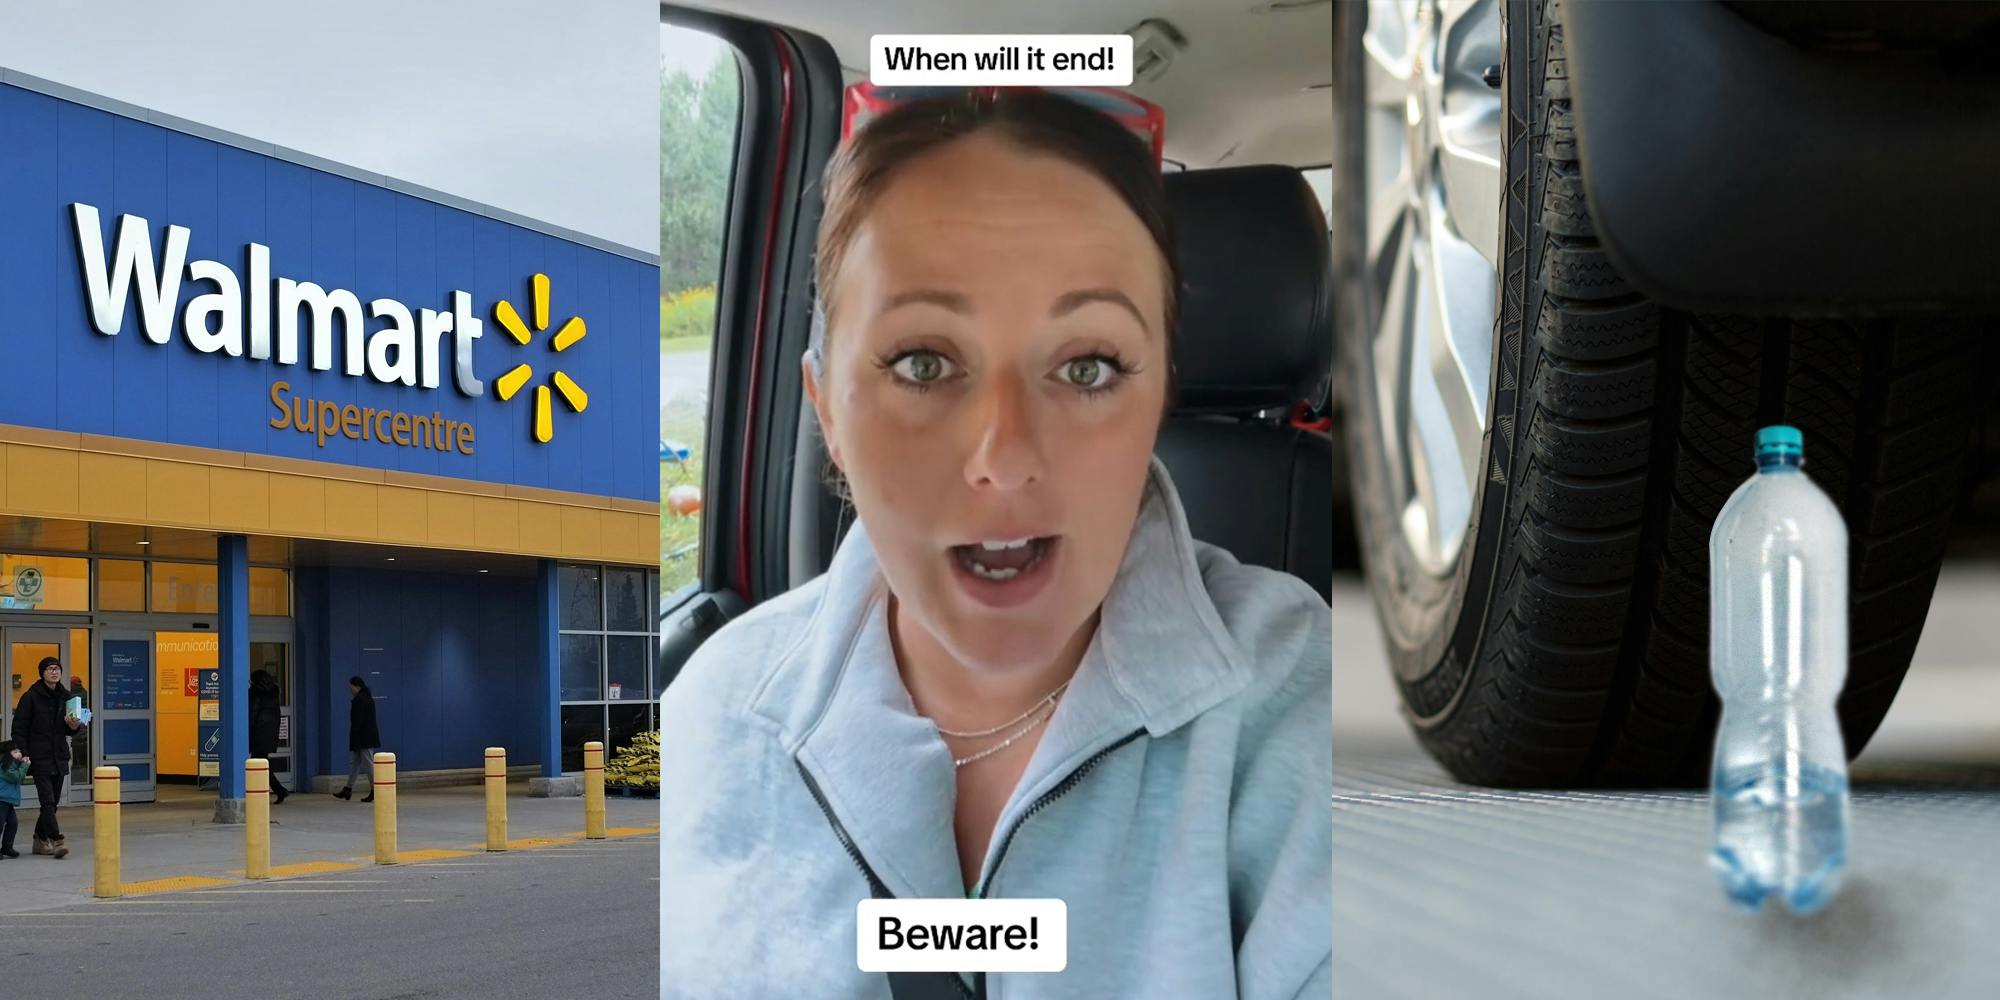 Walmart building with sign (c) woman speaking in car with caption "When will it end! Beware!" (c) water bottle behind car tire (r)